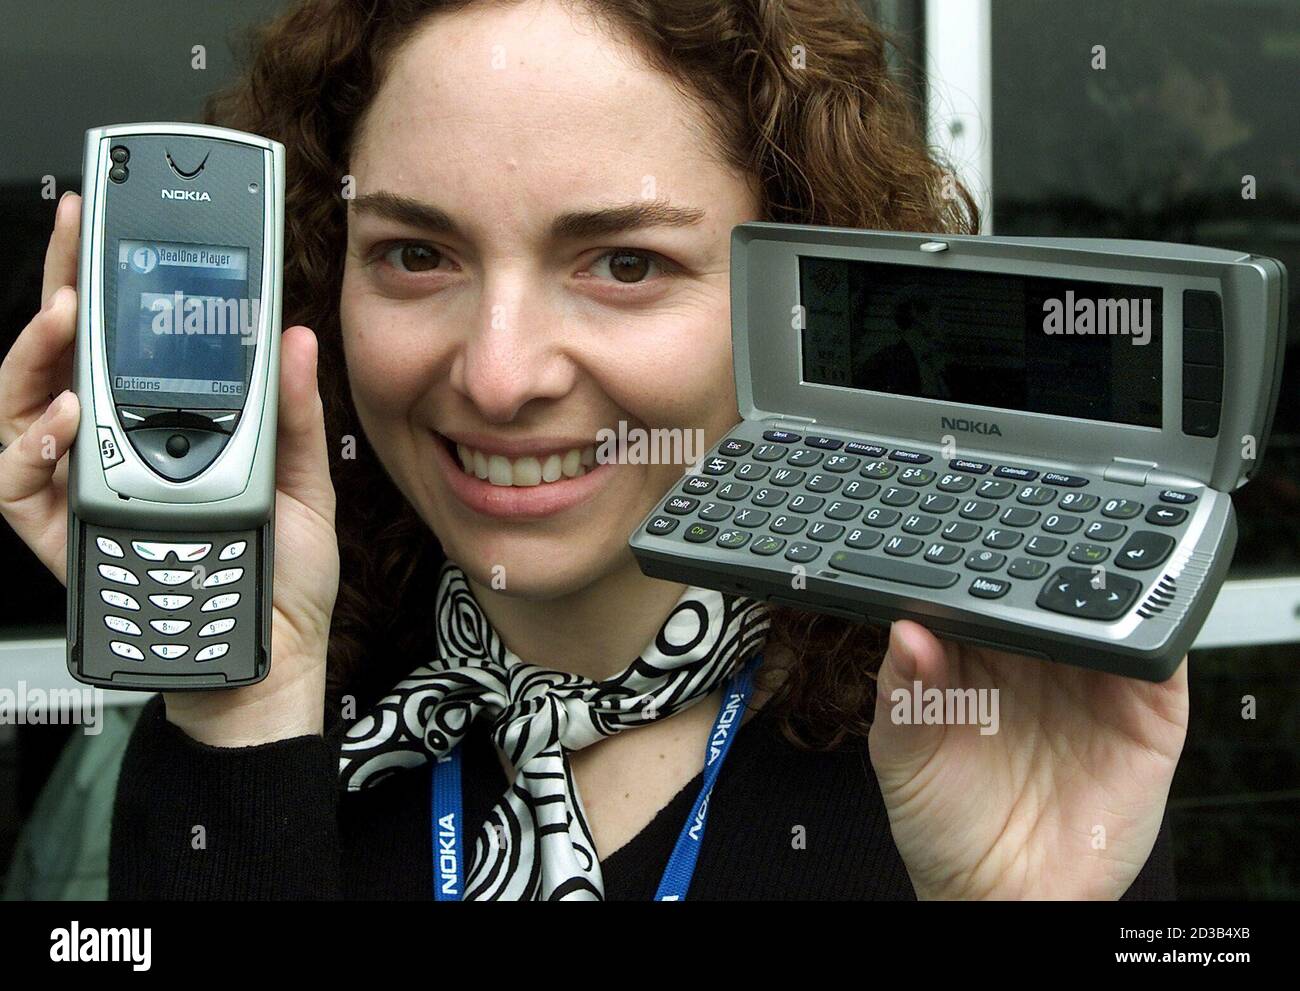 A Model Displays The Latest Nokia 7650 L Mobile Phone With An Integrated Camera And The 9210i Communicator R As World Premier At The Cebit Fair In Hanover March 12 02 About